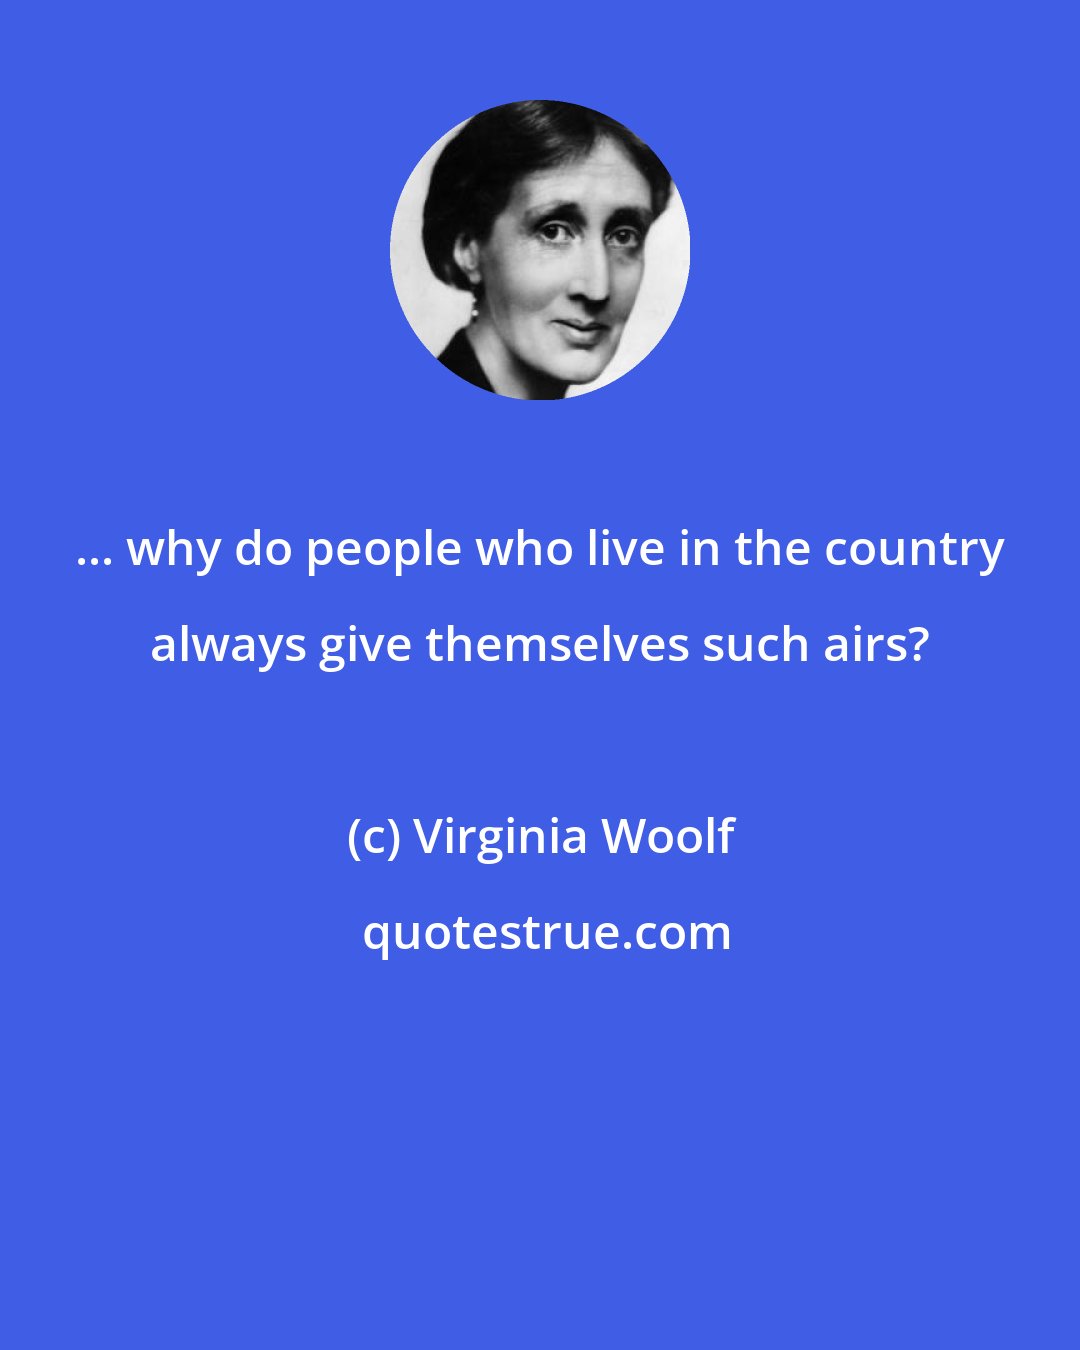 Virginia Woolf: ... why do people who live in the country always give themselves such airs?